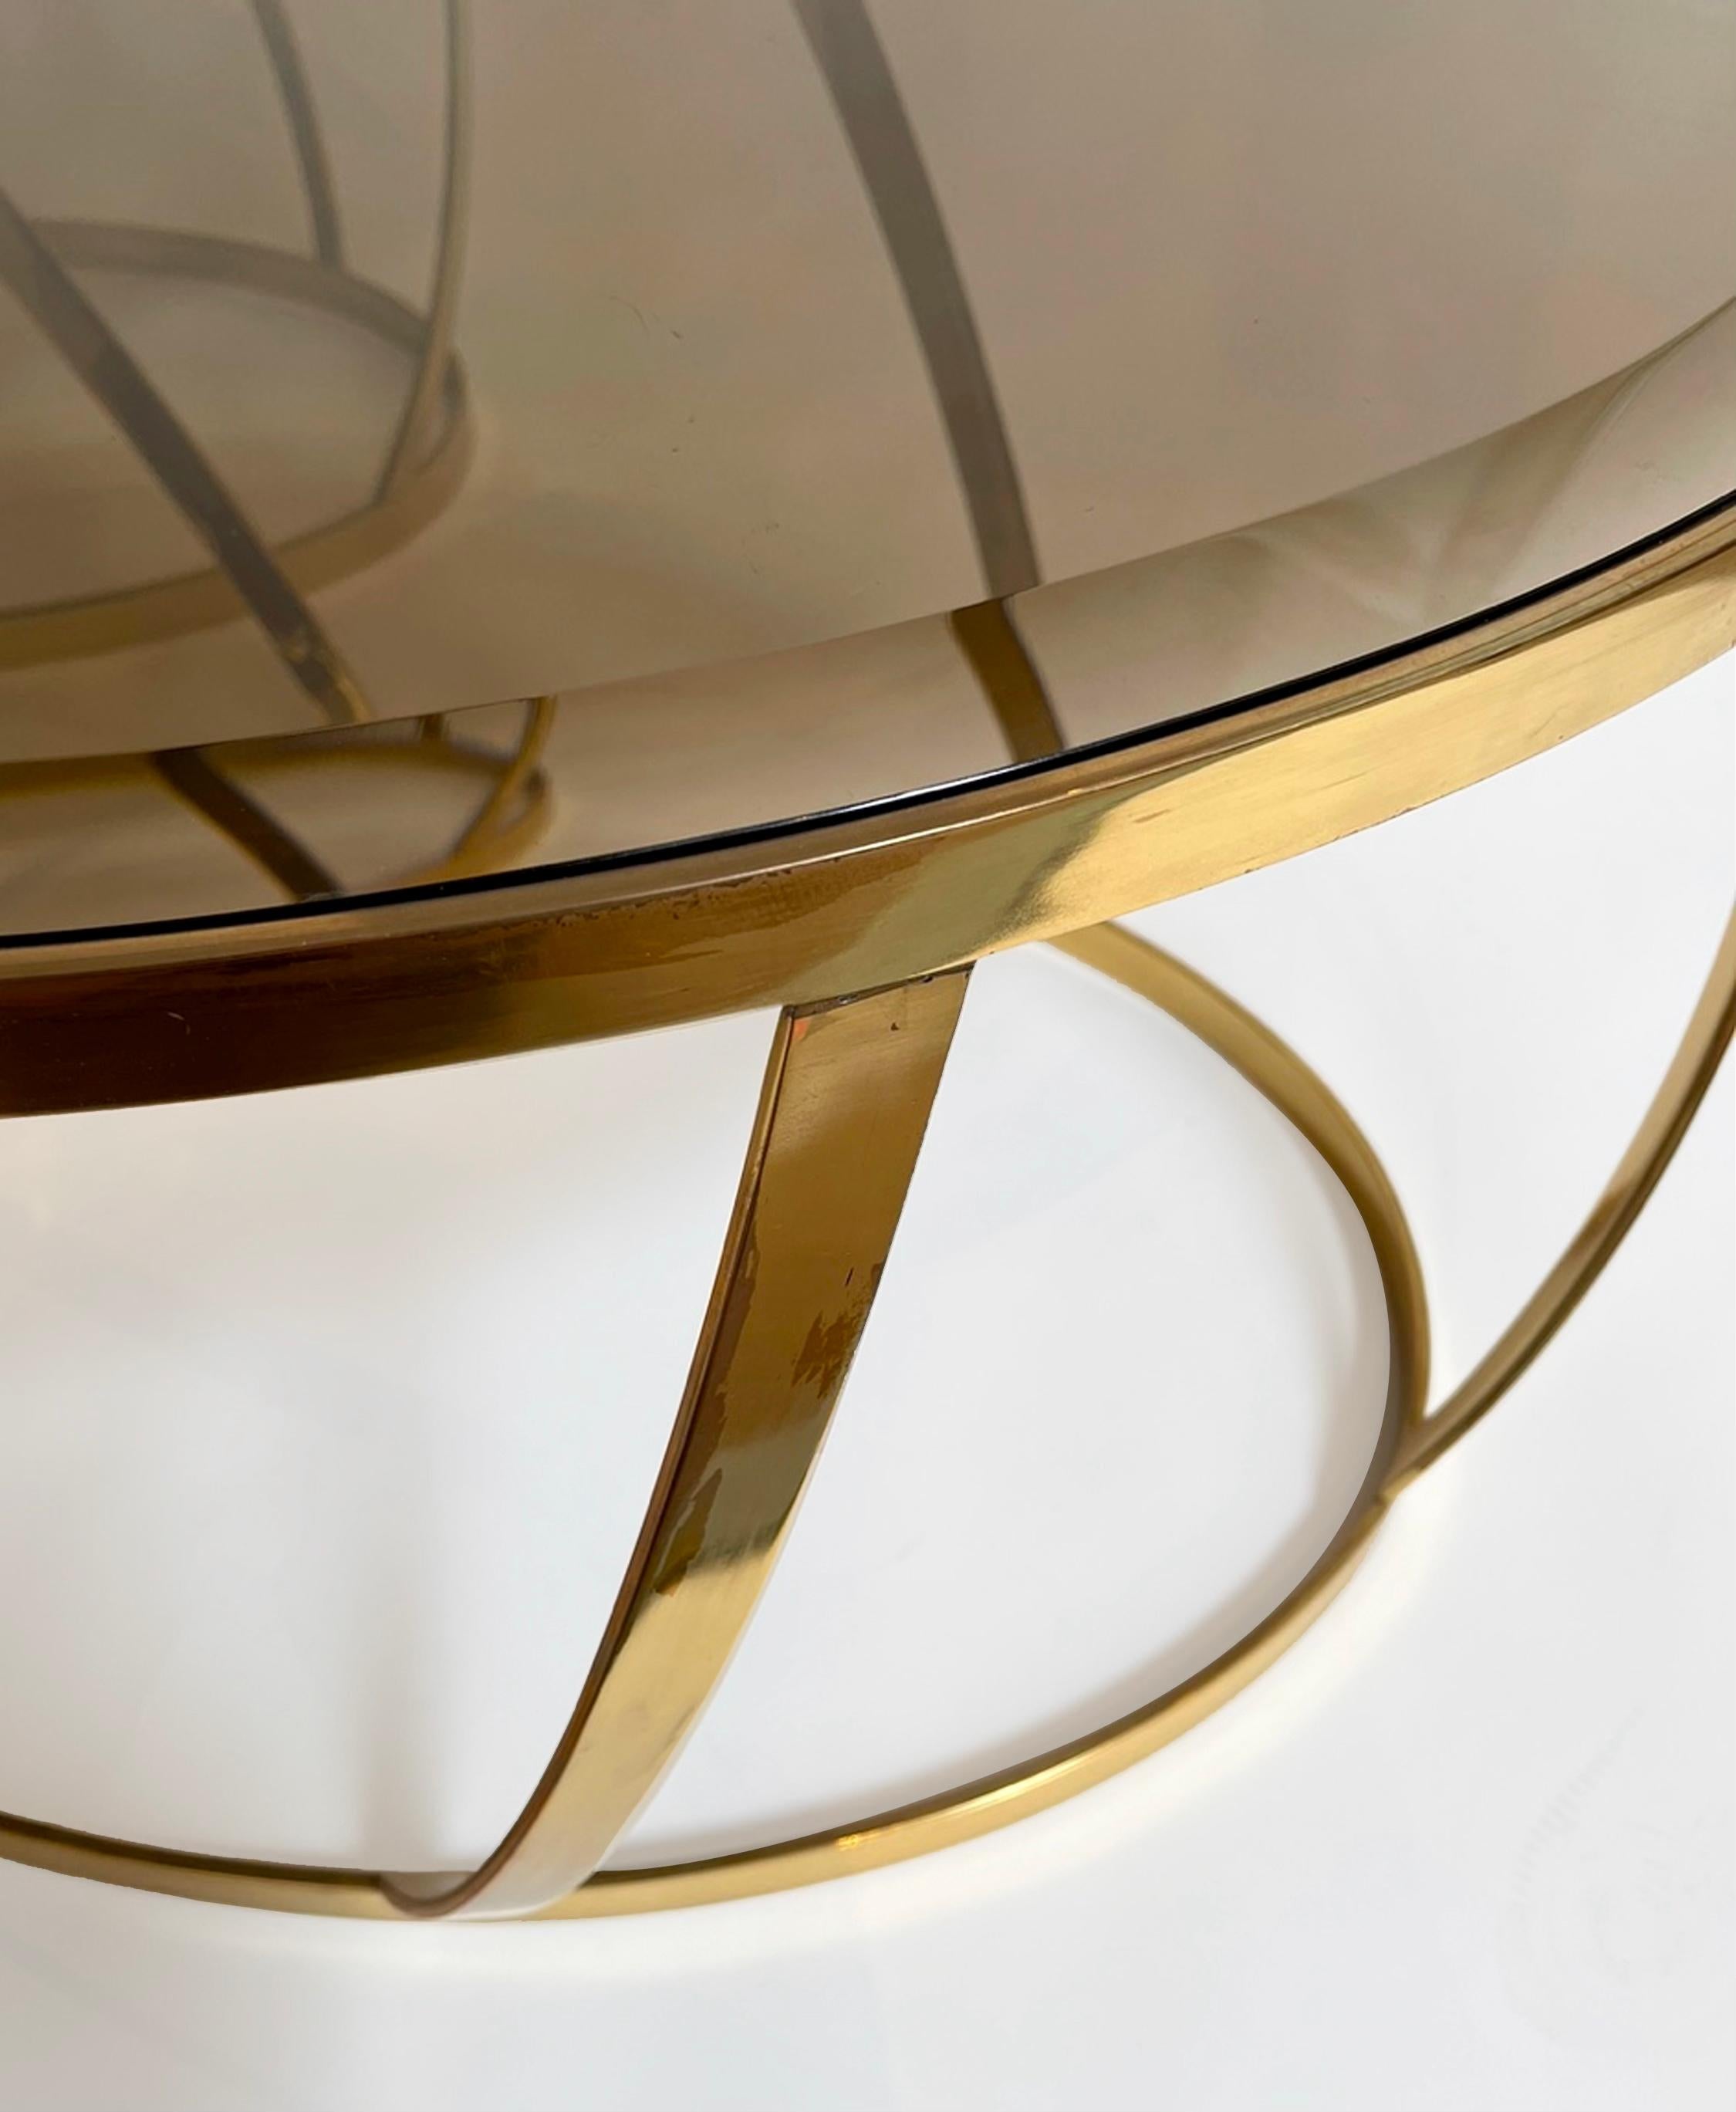 Polished and glamorous oval side tables by Karl Springer. Made of solid brass and beveled, smokey brown glass. Removable glass for easy transport. Sold as a set. This is an authentic, original Karl Springer design. Ready for use.
 